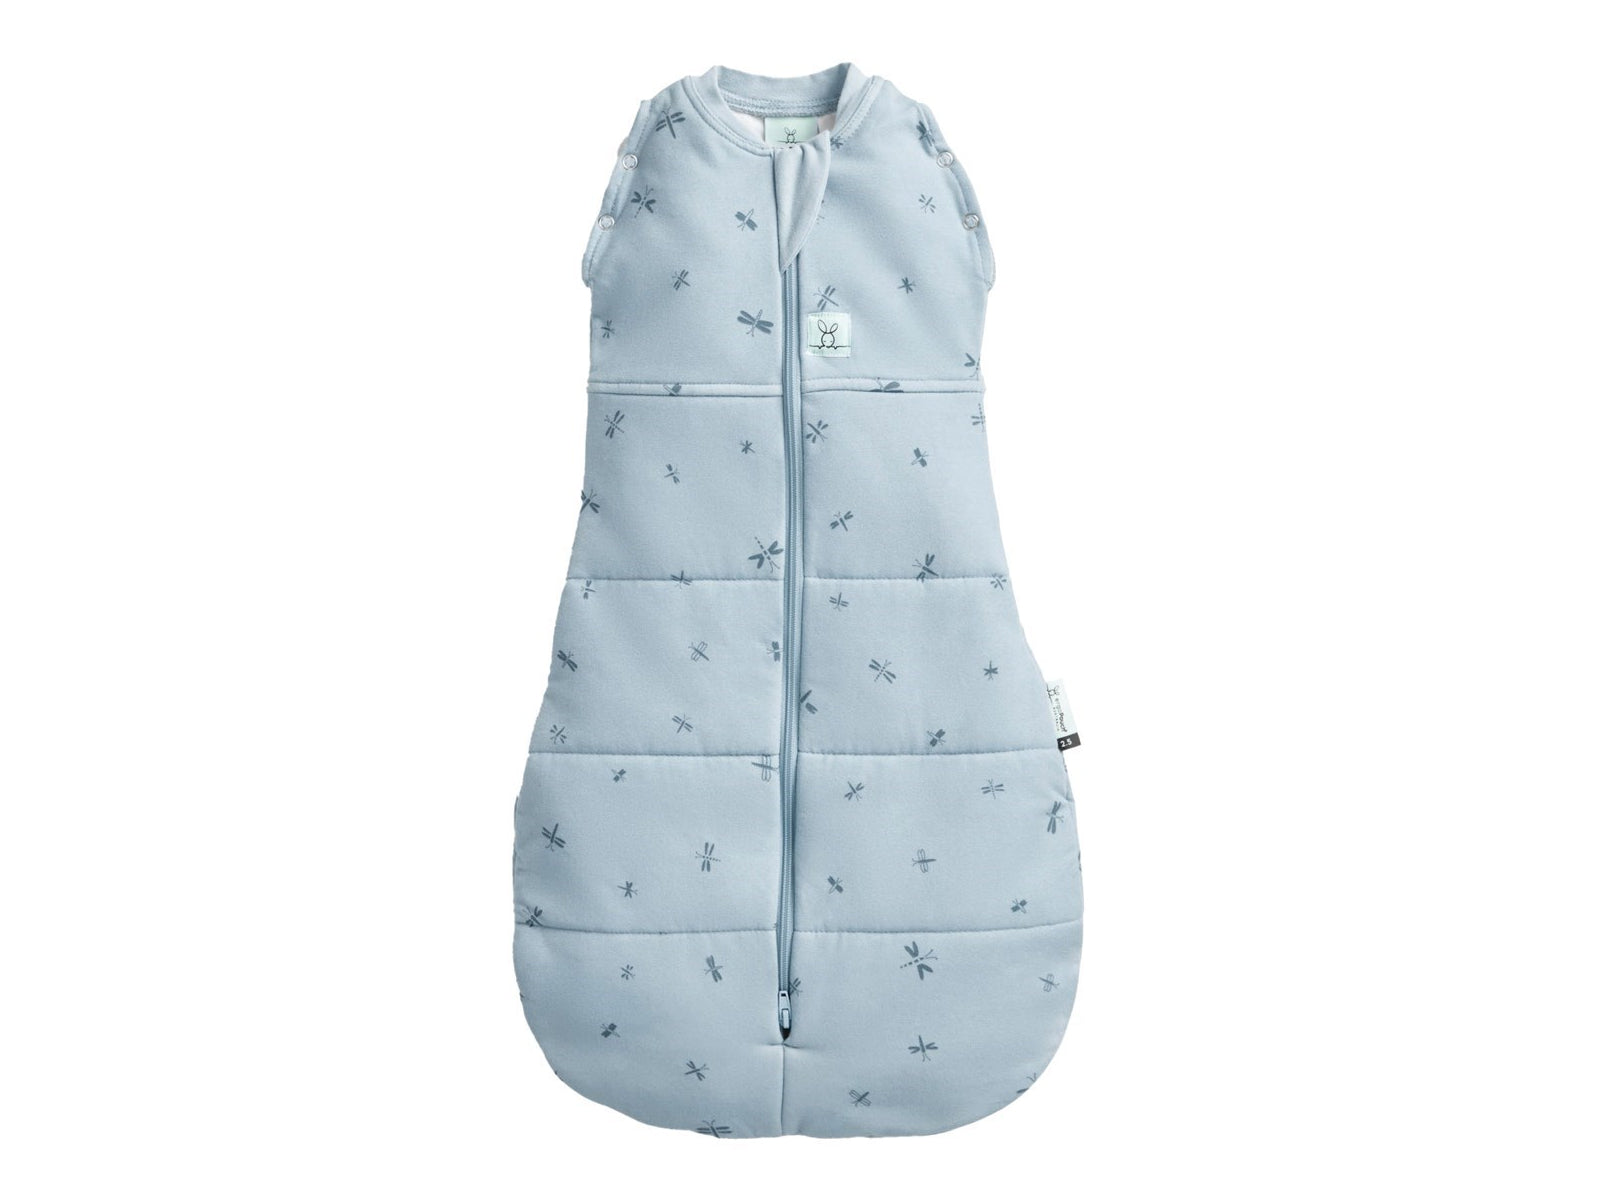 Blue 'cocoon swaddle' baby sleeping bag with dragonfly pattern